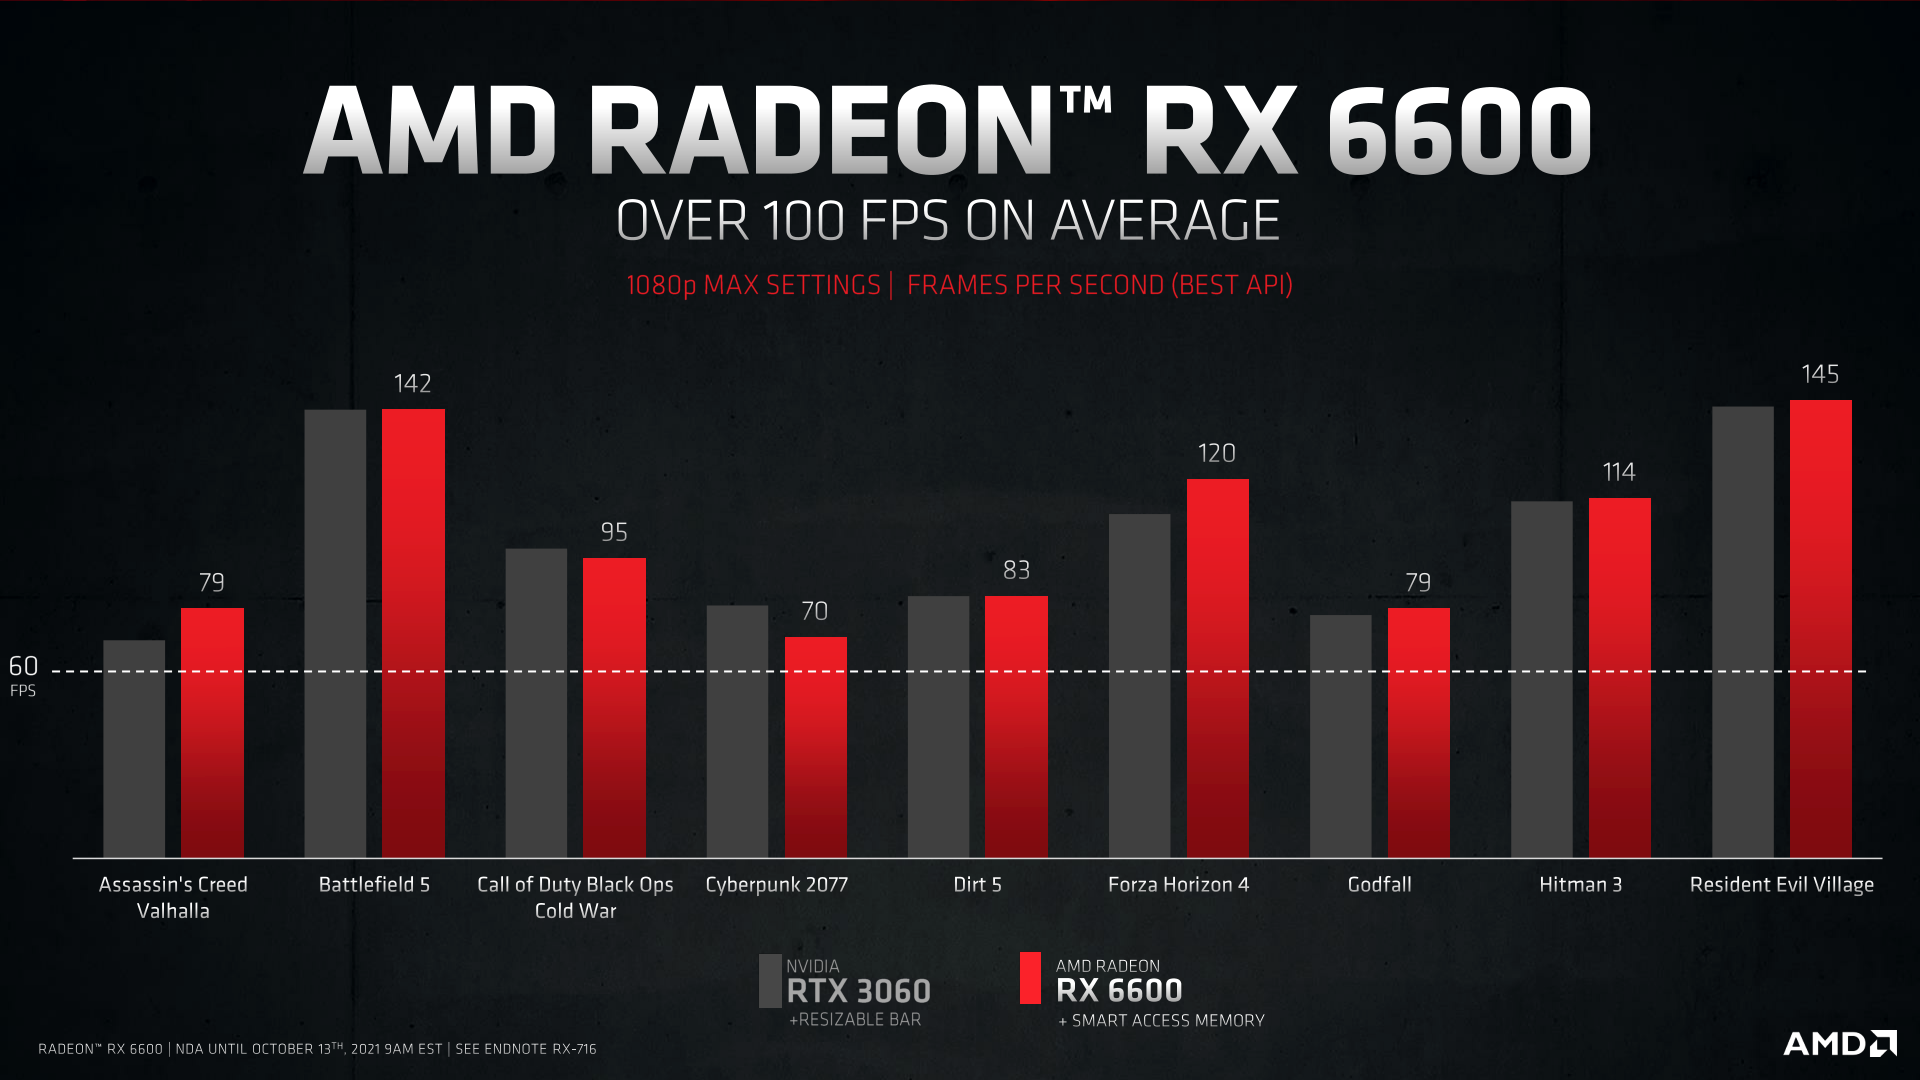 Grab this solid AMD RX 6600 for just £197 from Tech Next Day with this code